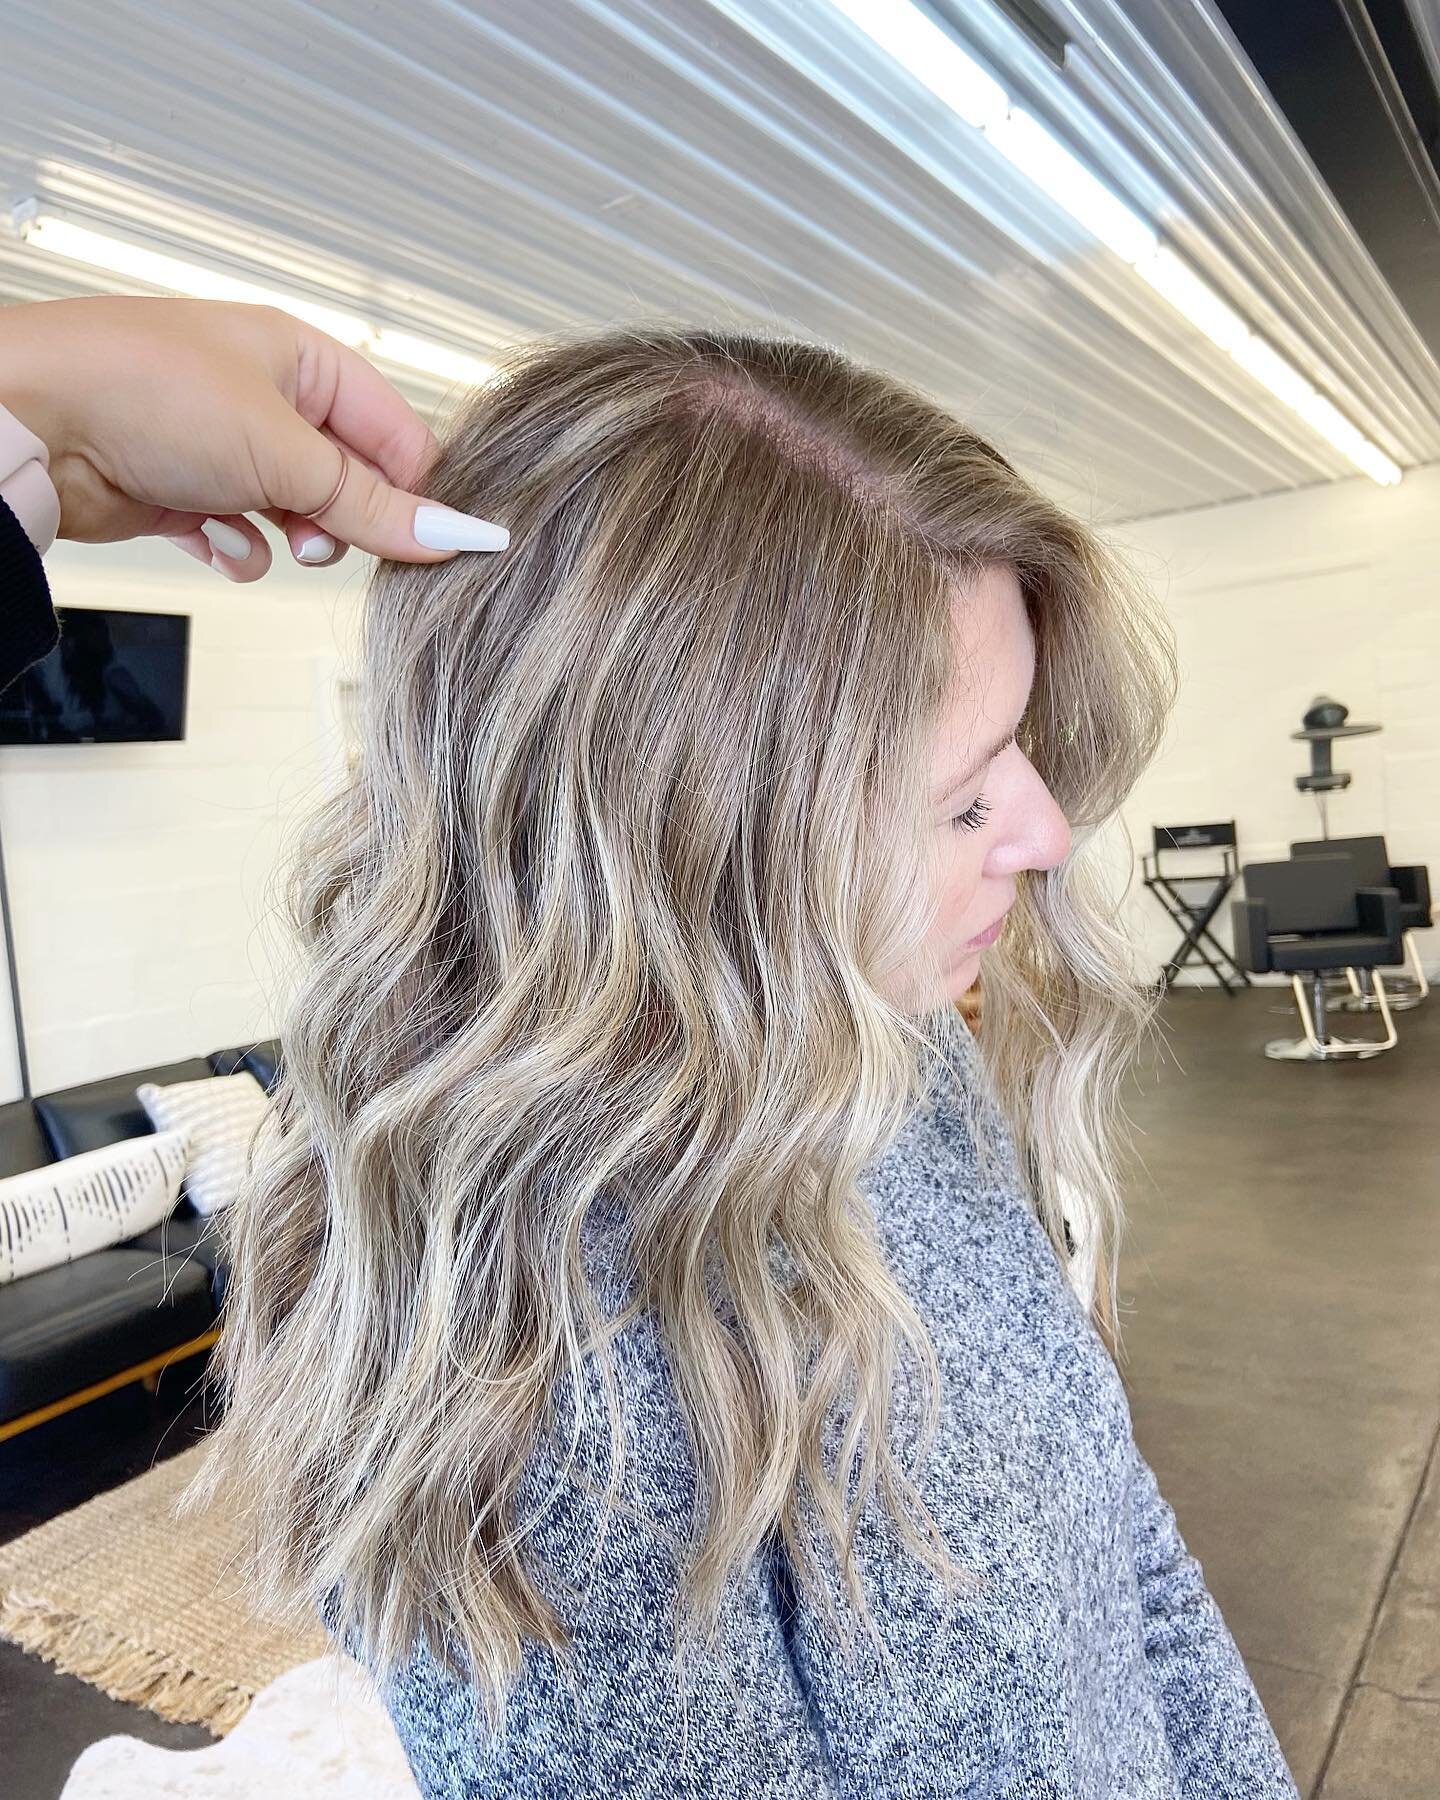 Beautiful blonde blend by our newest gal behind the chair @hairrbymaddiee 

Maddie is taking appointments Tuesdays and Saturdays currently, you can schedule with her through our booking link.